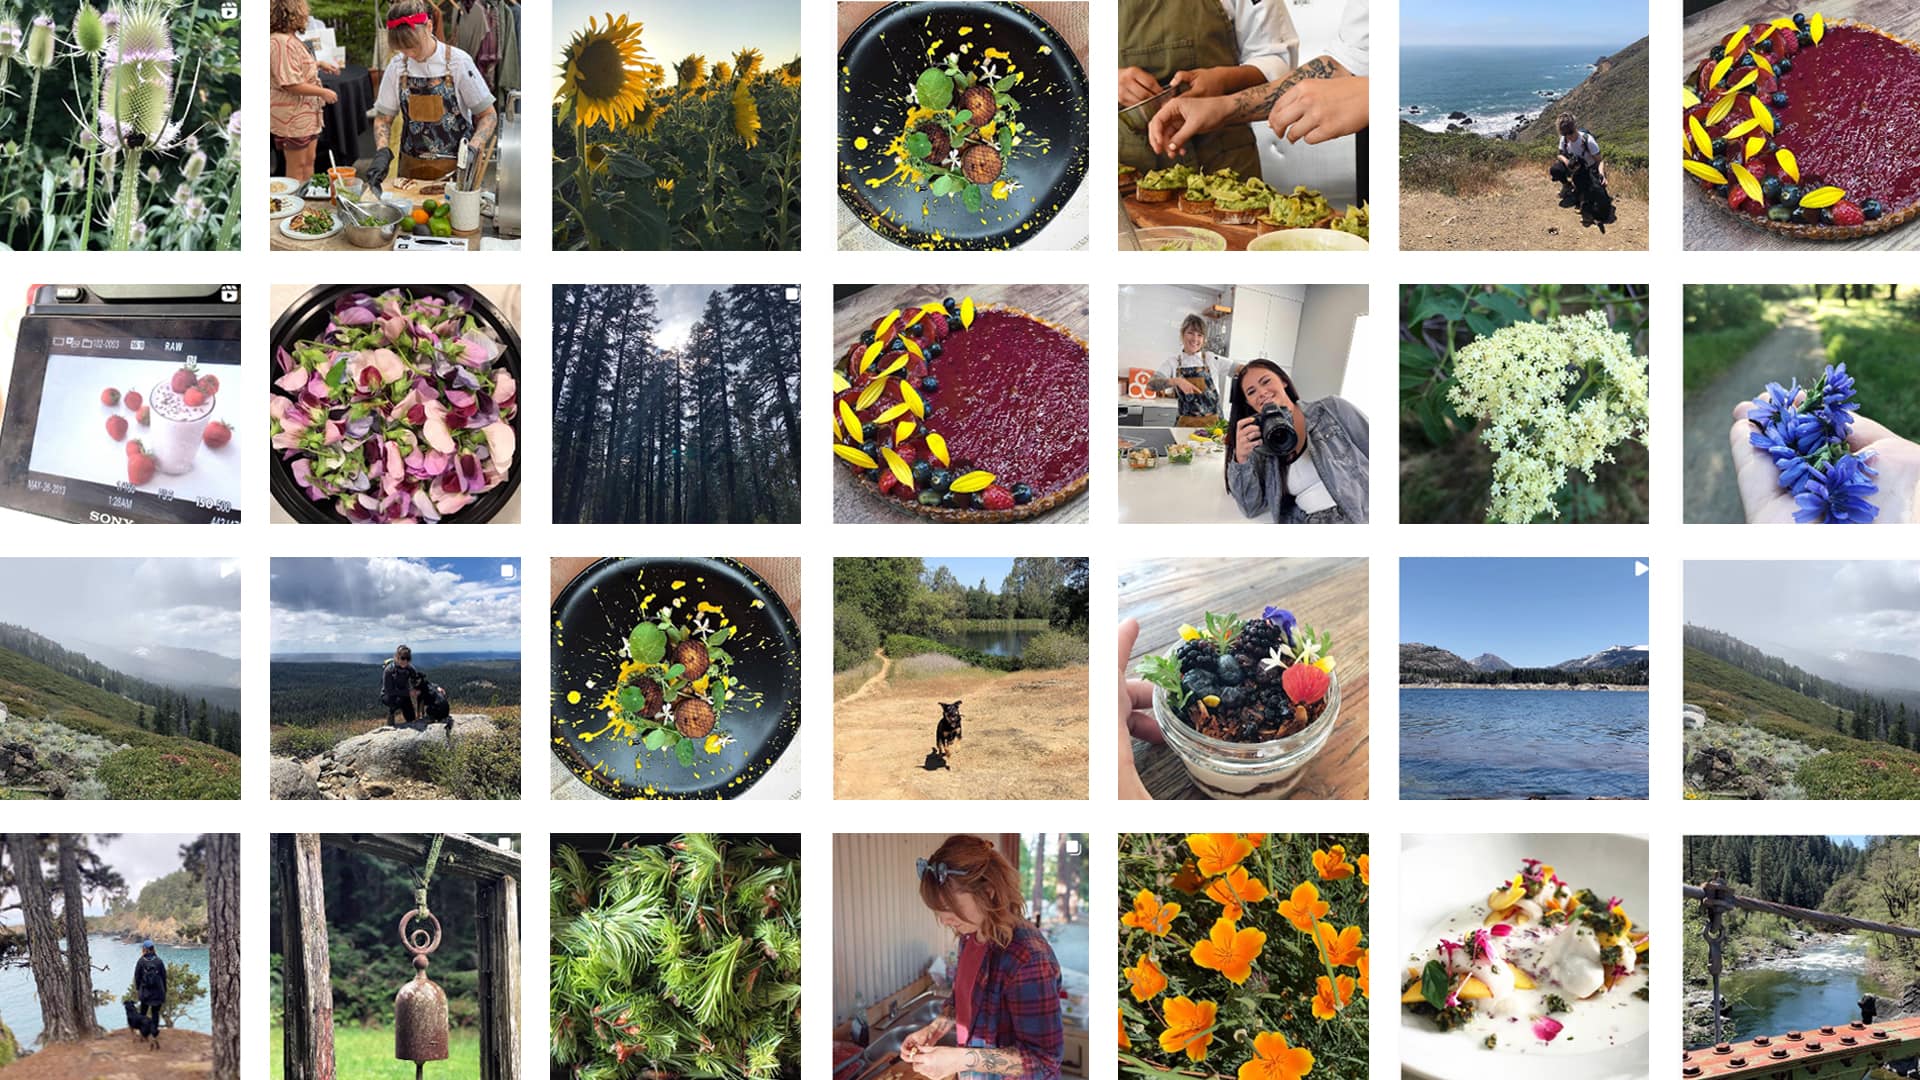 Chef Sky Hanka’s Instagram feed reflects her interest in eating mindfully and exploring the great outdoors. 